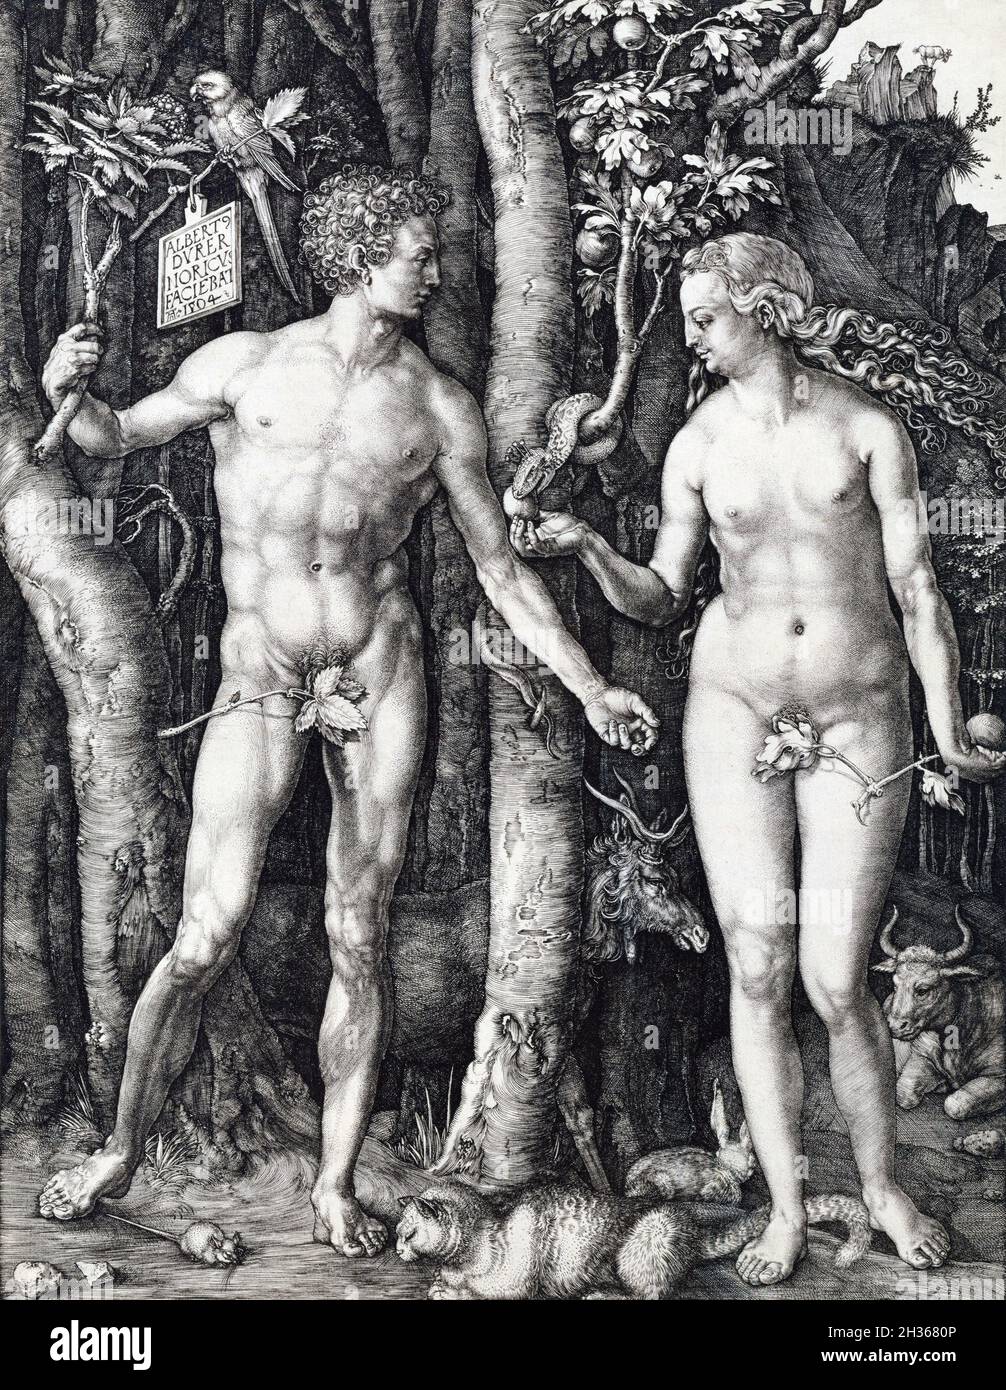 Germany: 'Adam and Eve'. Copper engraving by Albrecht Durer (21 May 1471 - 6 April 1528), 1504.  According to the Book of Genesis, God created the universe in seven days. On the sixth day, he created ‘Adam’, the Hebrew word for ‘man’, and placed him in Paradise - the Garden of Eden. From one of Adam’s ribs, God then created a mate for him: Eve, meaning ‘Mother of Life’.  Adam and Eve were permitted to eat all the fruit in the garden except that from the ‘Tree of Knowledge’. However, the devil, disguised as a serpent, persuaded Eve to eat the forbidden fruit, an apple, mankind's Original Sin. Stock Photo